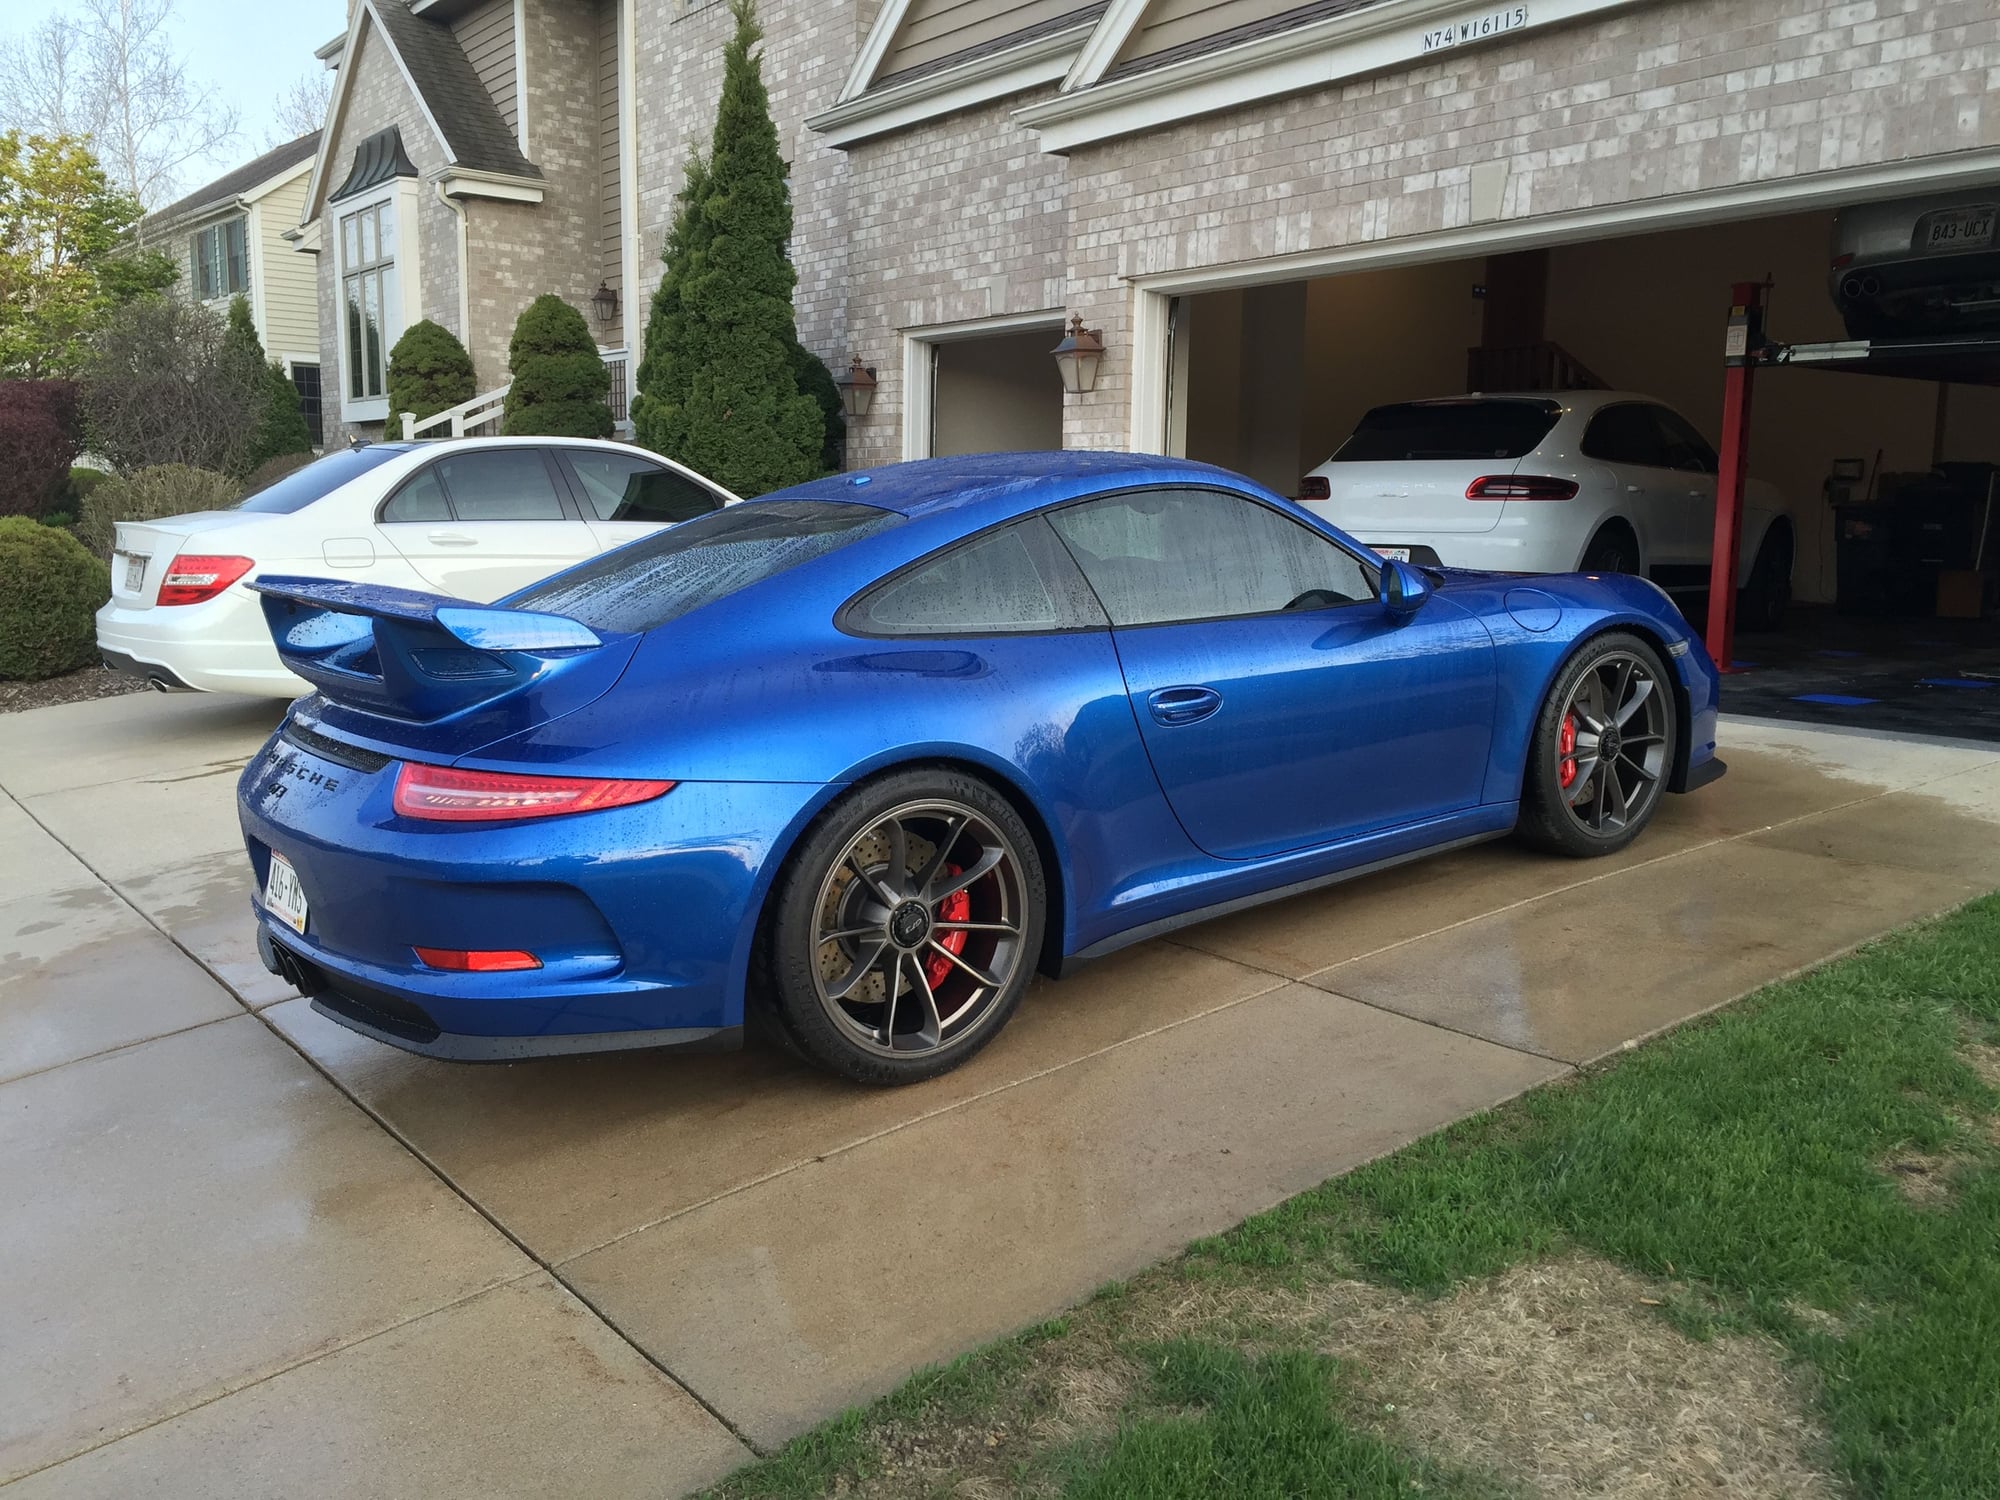 2016 Porsche GT3 - 2,400 miles/SB GT3 well optioned with LWBS - Used - VIN WP0AC2A98GS184249 - 2,234 Miles - 6 cyl - 2WD - Automatic - Coupe - Blue - Milwaukee, WI 53051, United States